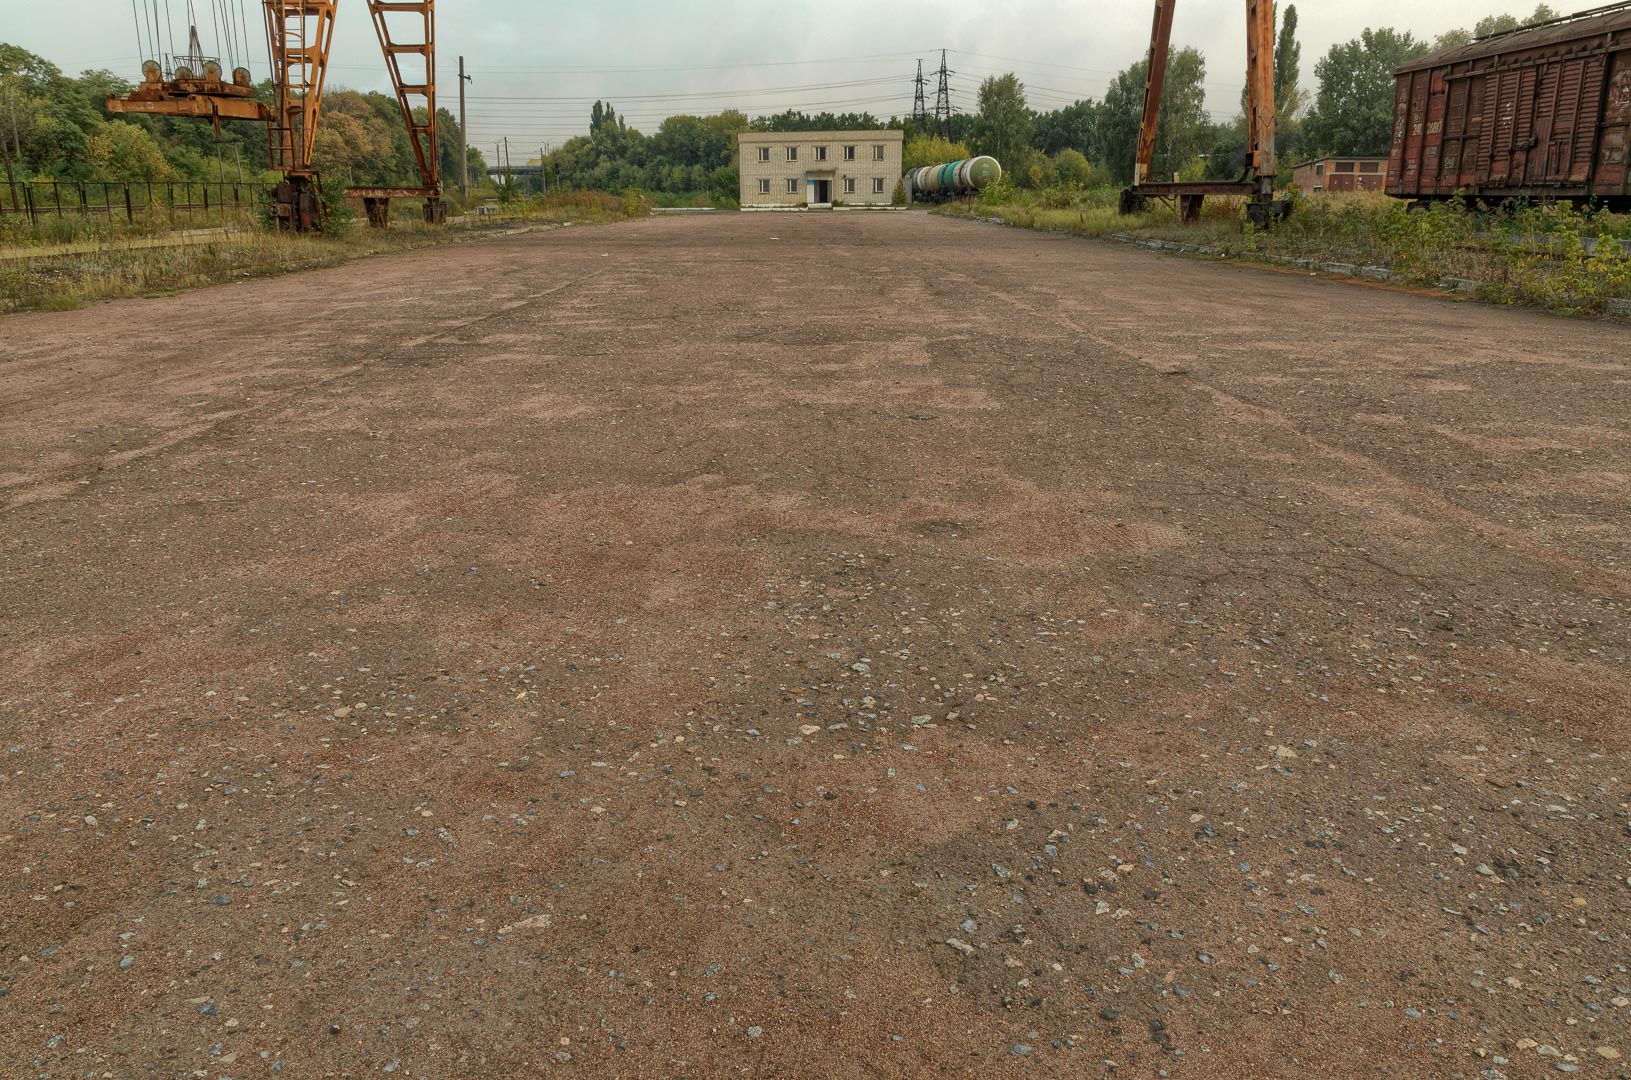 Backplate • ID: 12663 • HDRI Haven - Parking Lot By Railway